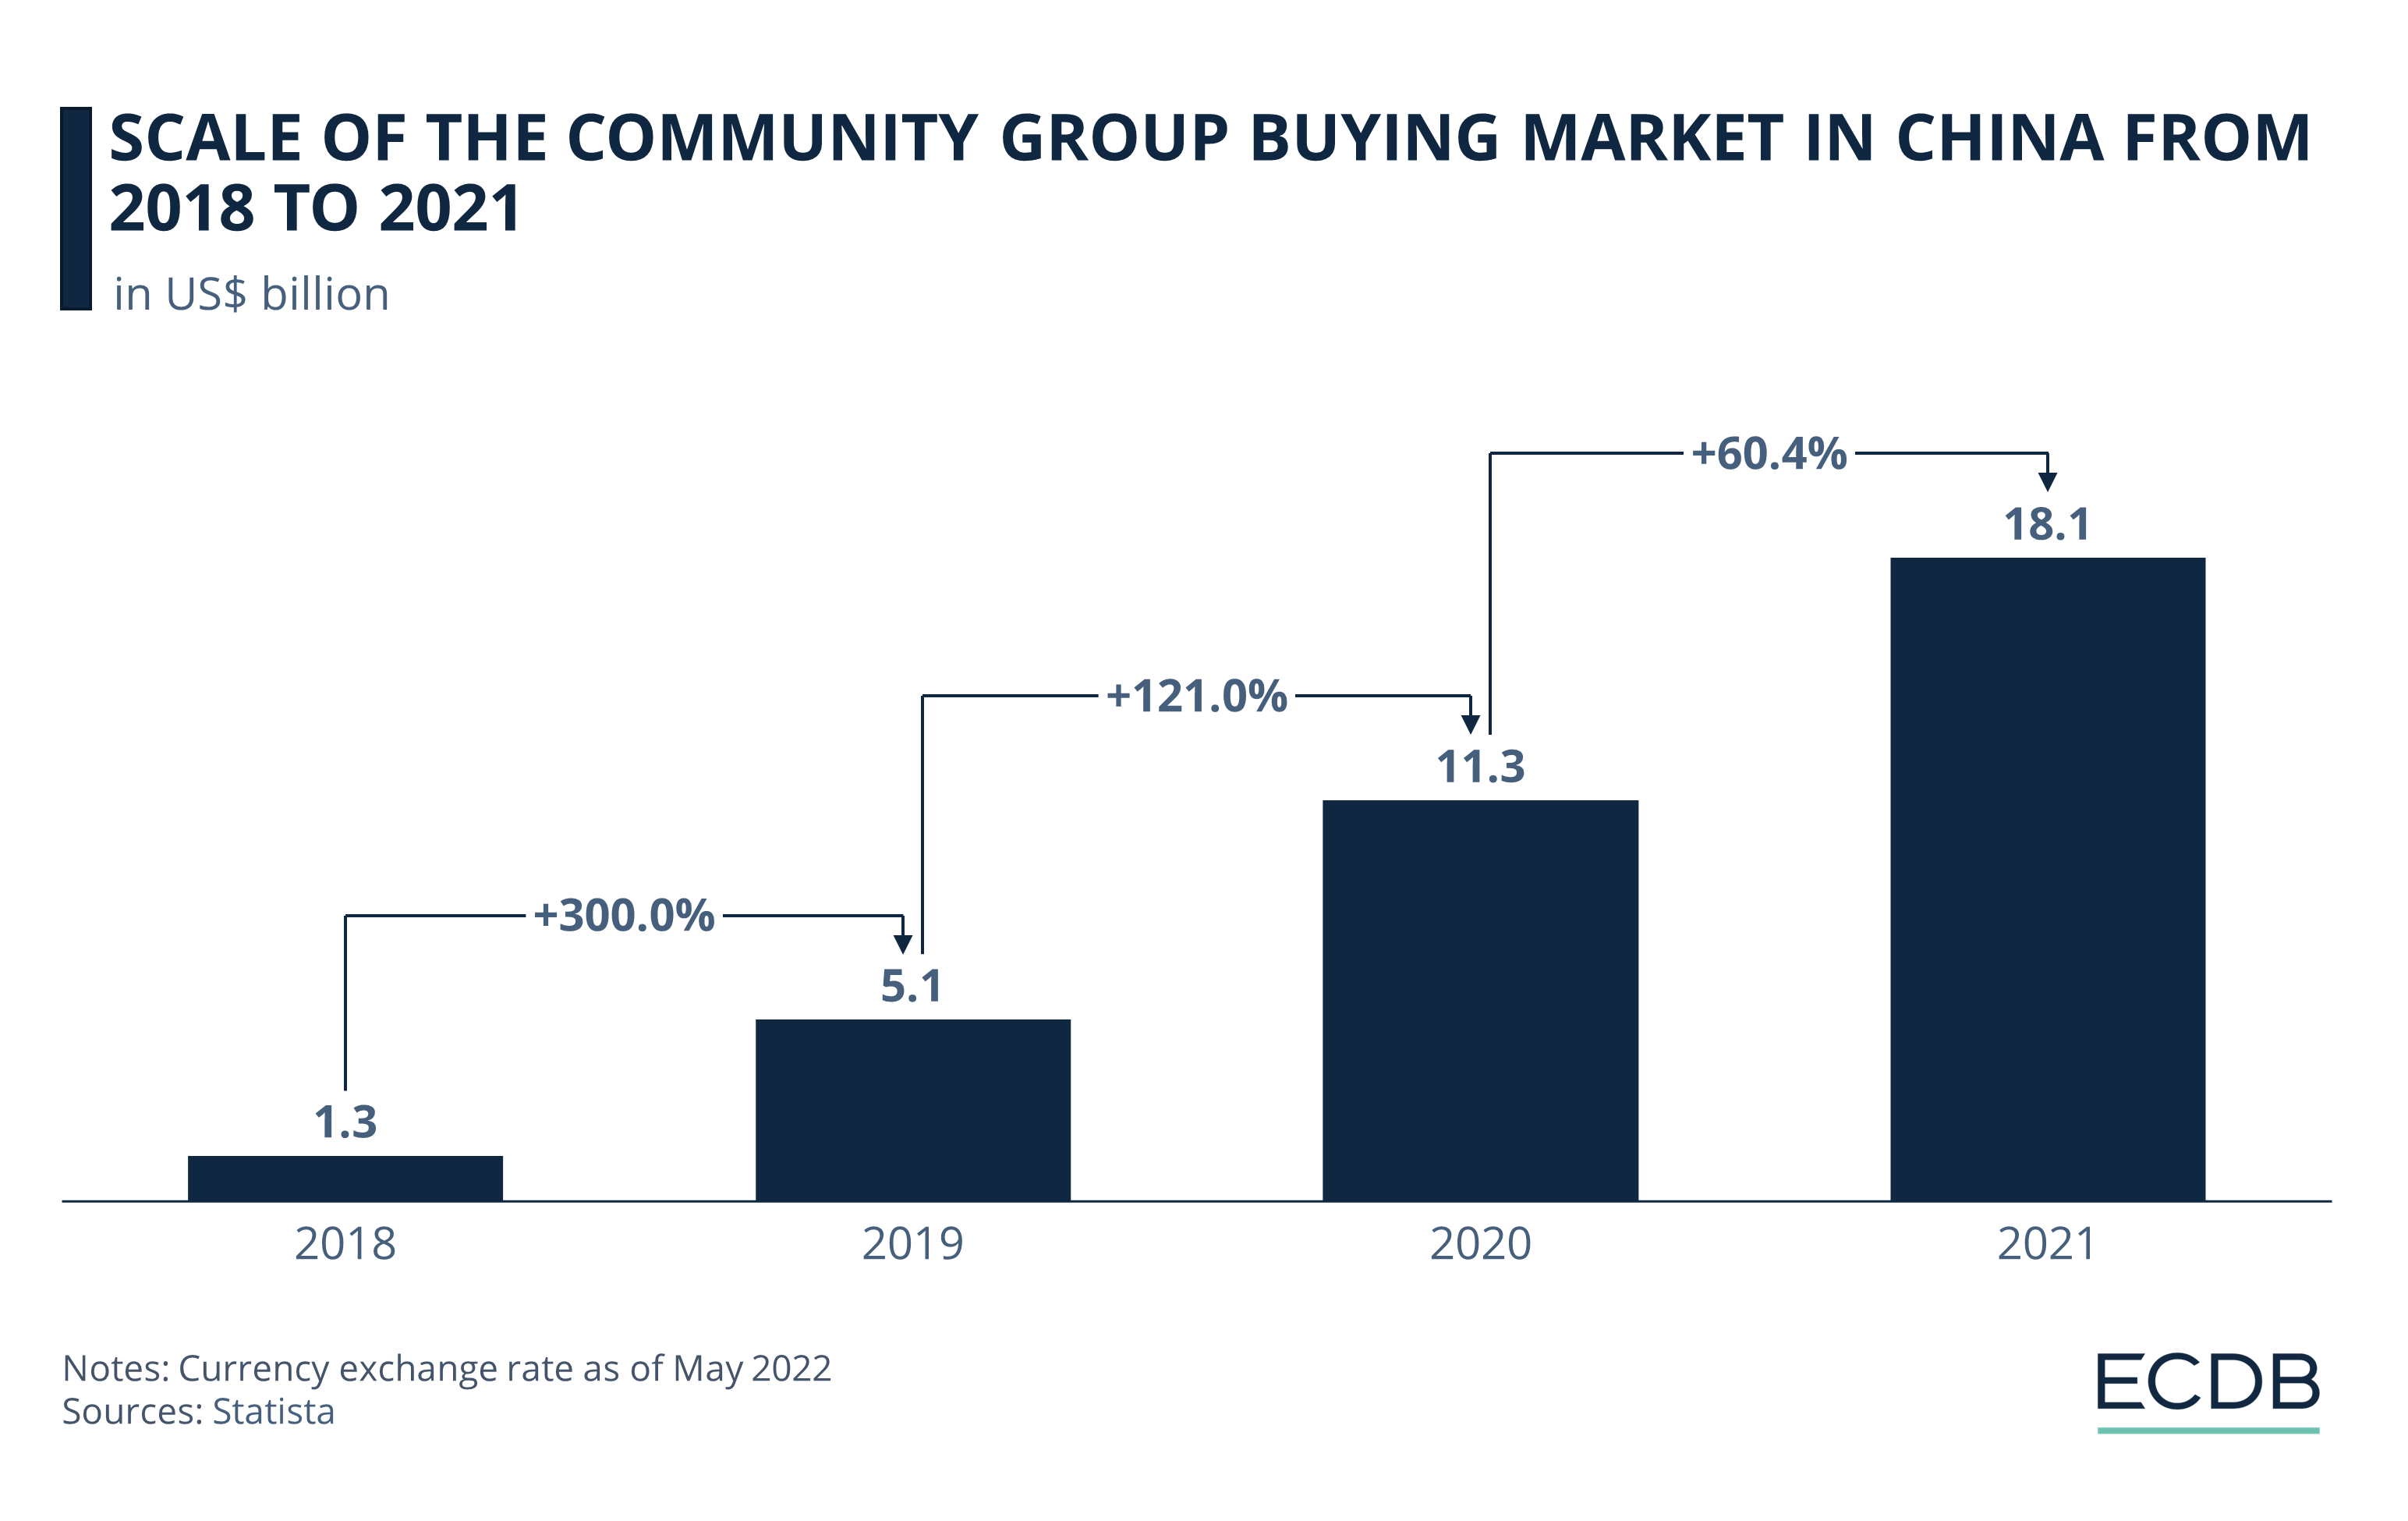 Scale of the Community Group Buying Market in China from 2018 to 2021